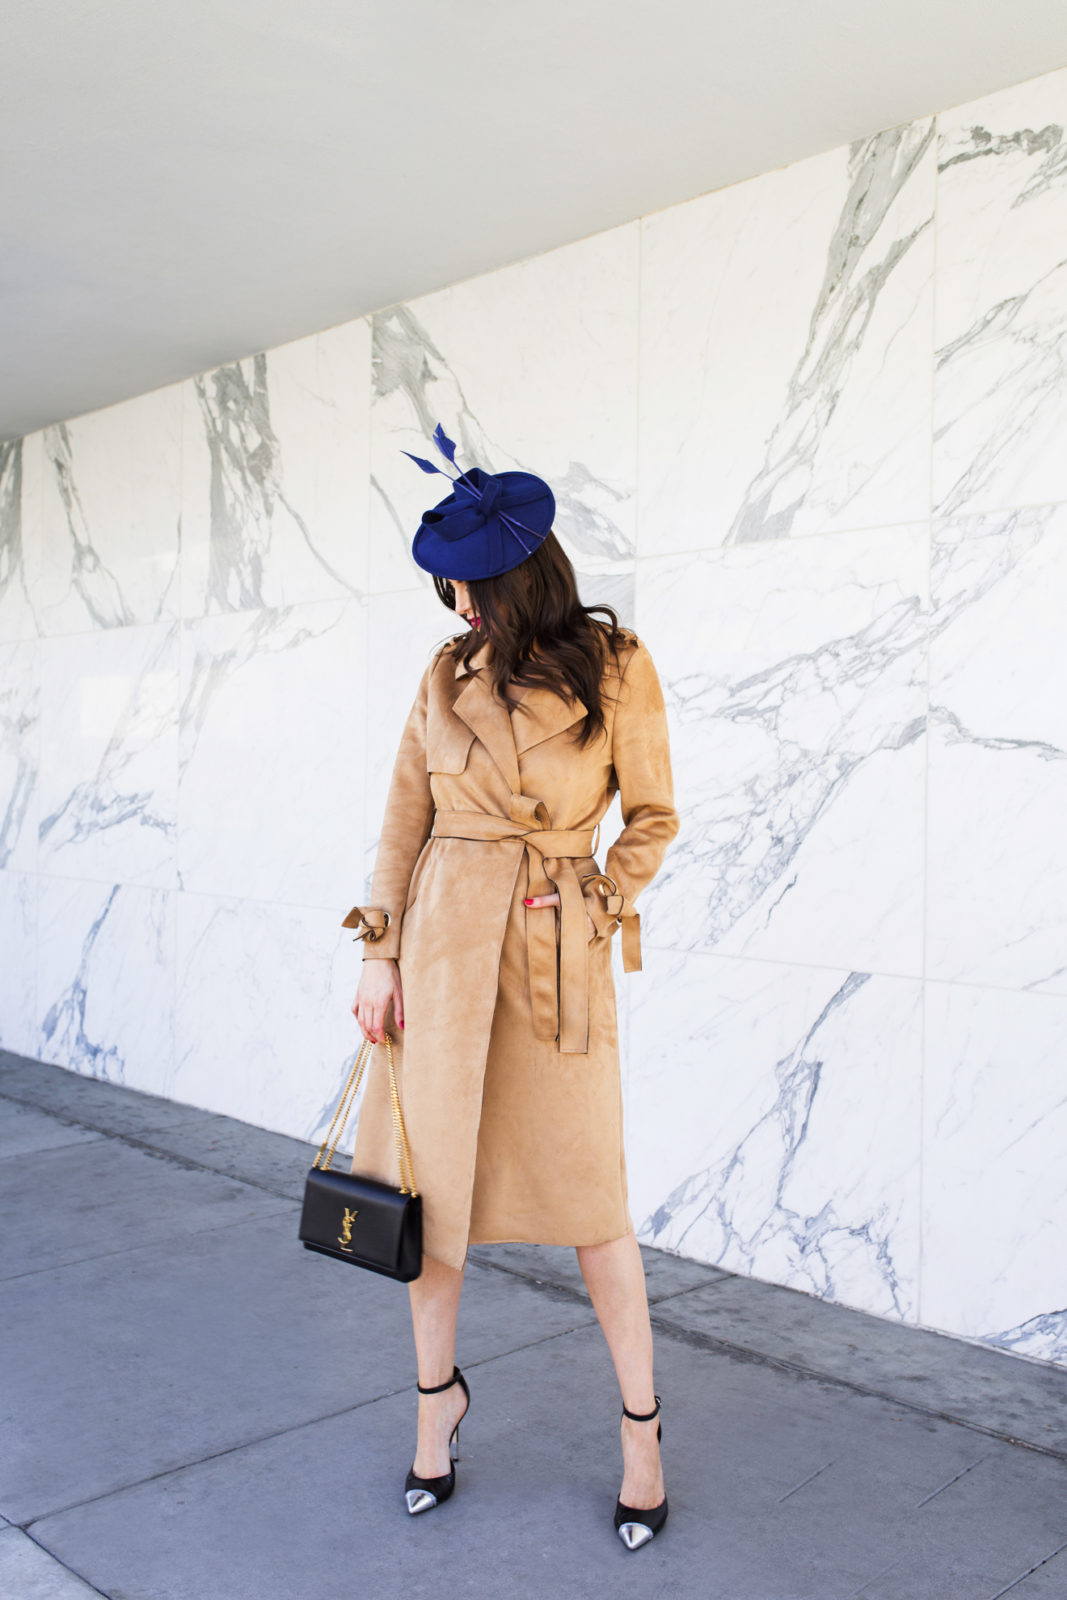 Top US fashion blogger, Laura Lily, features the best fascinators: image of a woman wearing a vintage blue fascinator, River Island trench coat, Yves Saint Laurent shoulder bag, and Schutz heels. | The Marvelous Mrs. Maisel Style, Suede River Island Trench Coat,